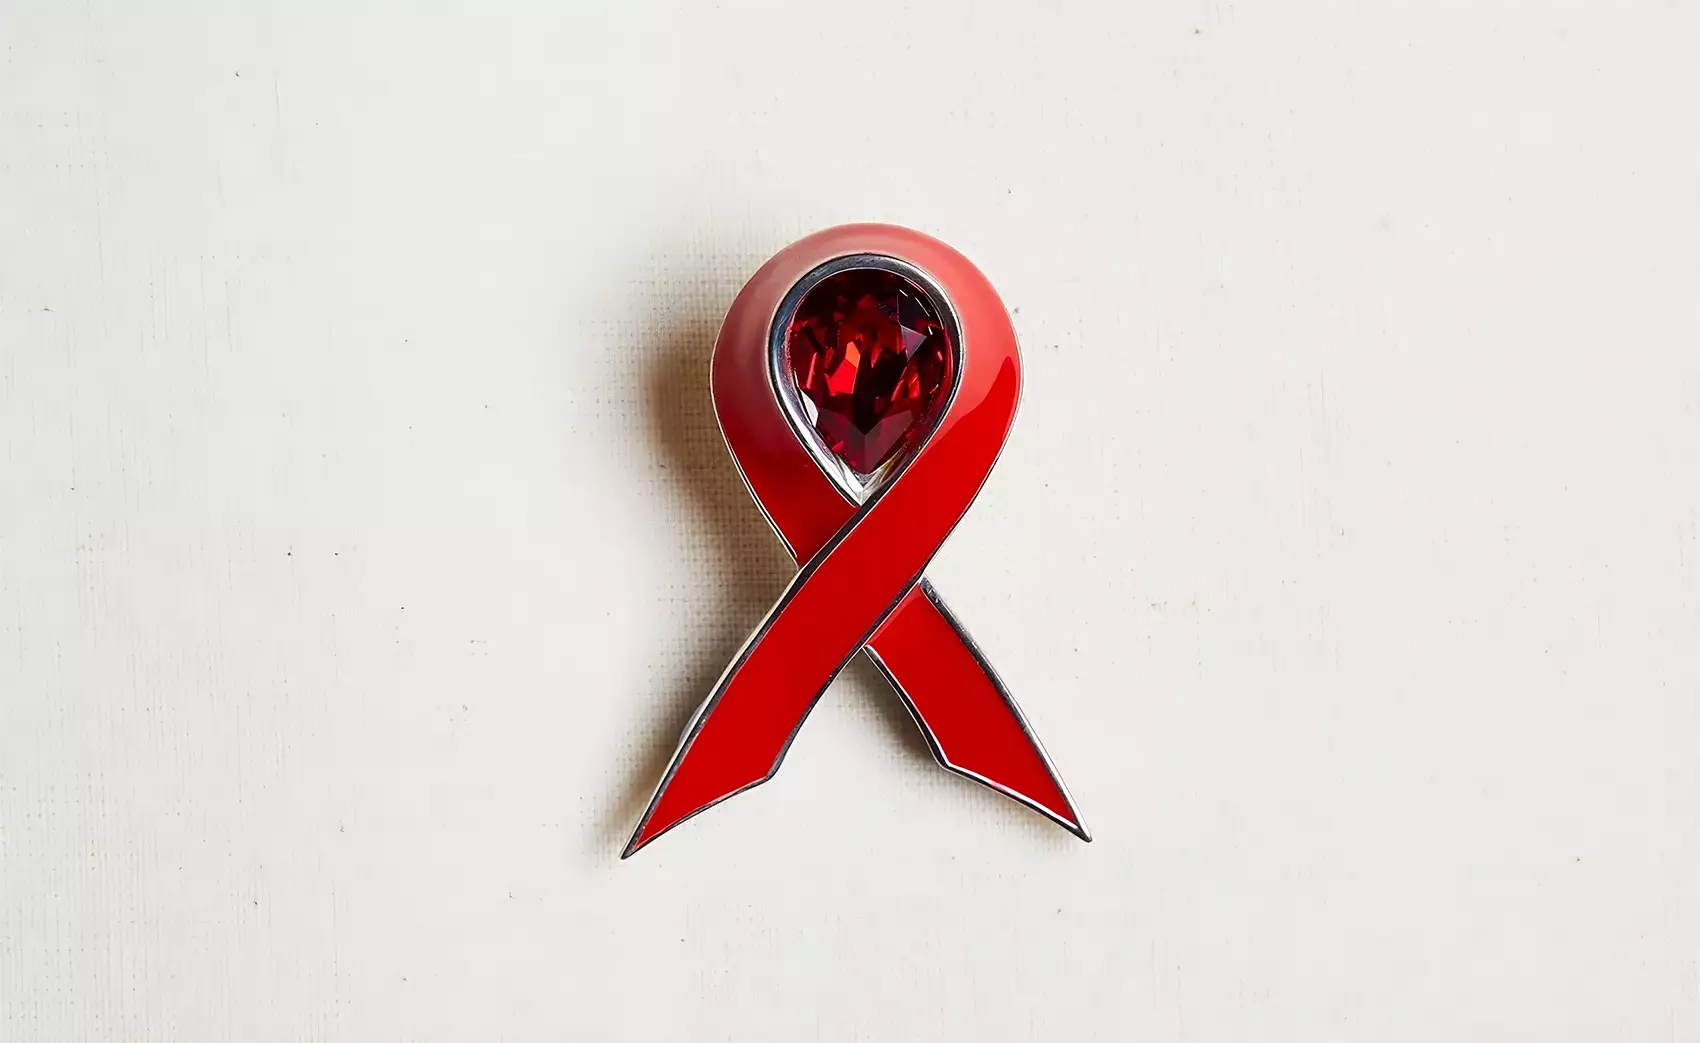 Shaun Leane's New Take on the World AIDS Day Ribbon